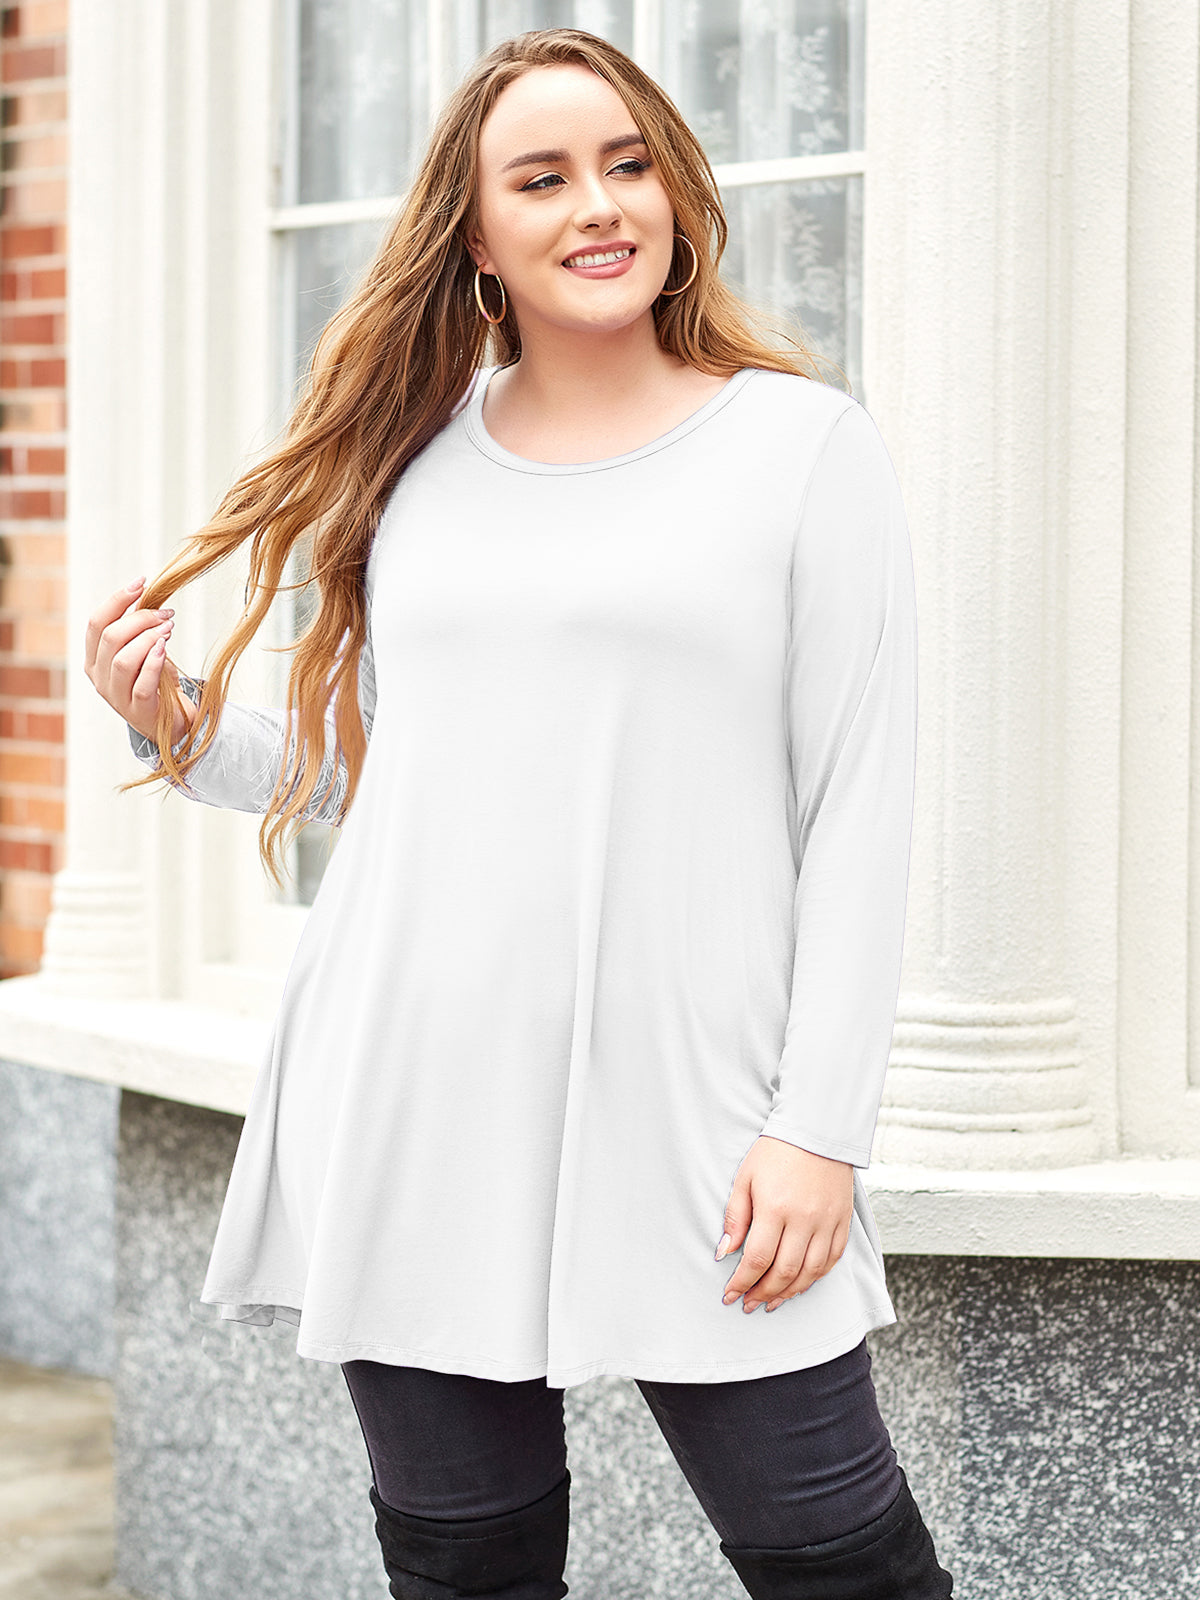 RITERA Plus Size Tops for Women 5X Oversized Button Loose Casual Shirt Long  Sleeve Basic Tunic Black 5XL 26W 28w at  Women's Clothing store